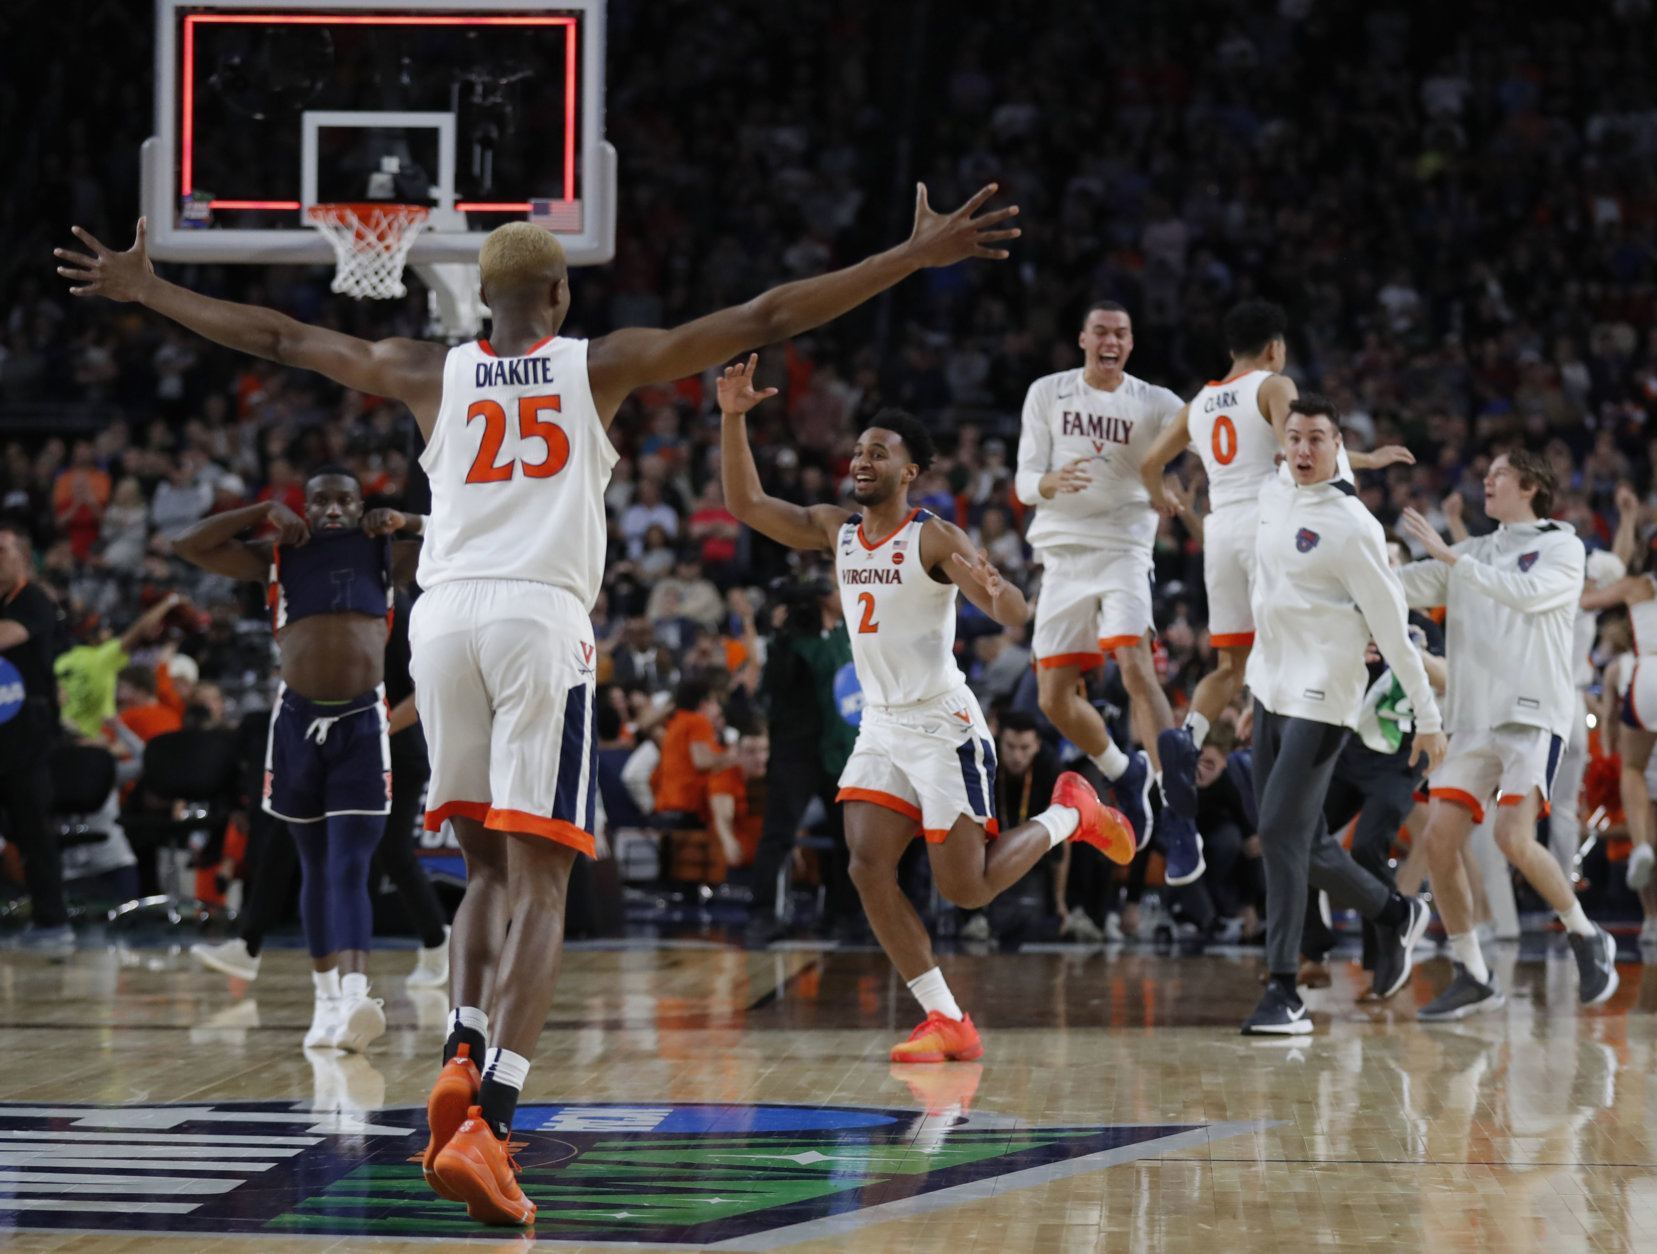 Virginia players celebrate after defeating Auburn 63-62 in the semifinals of the Final Four NCAA college basketball tournament, Saturday, April 6, 2019, in Minneapolis. (AP Photo/Charlie Neibergall)